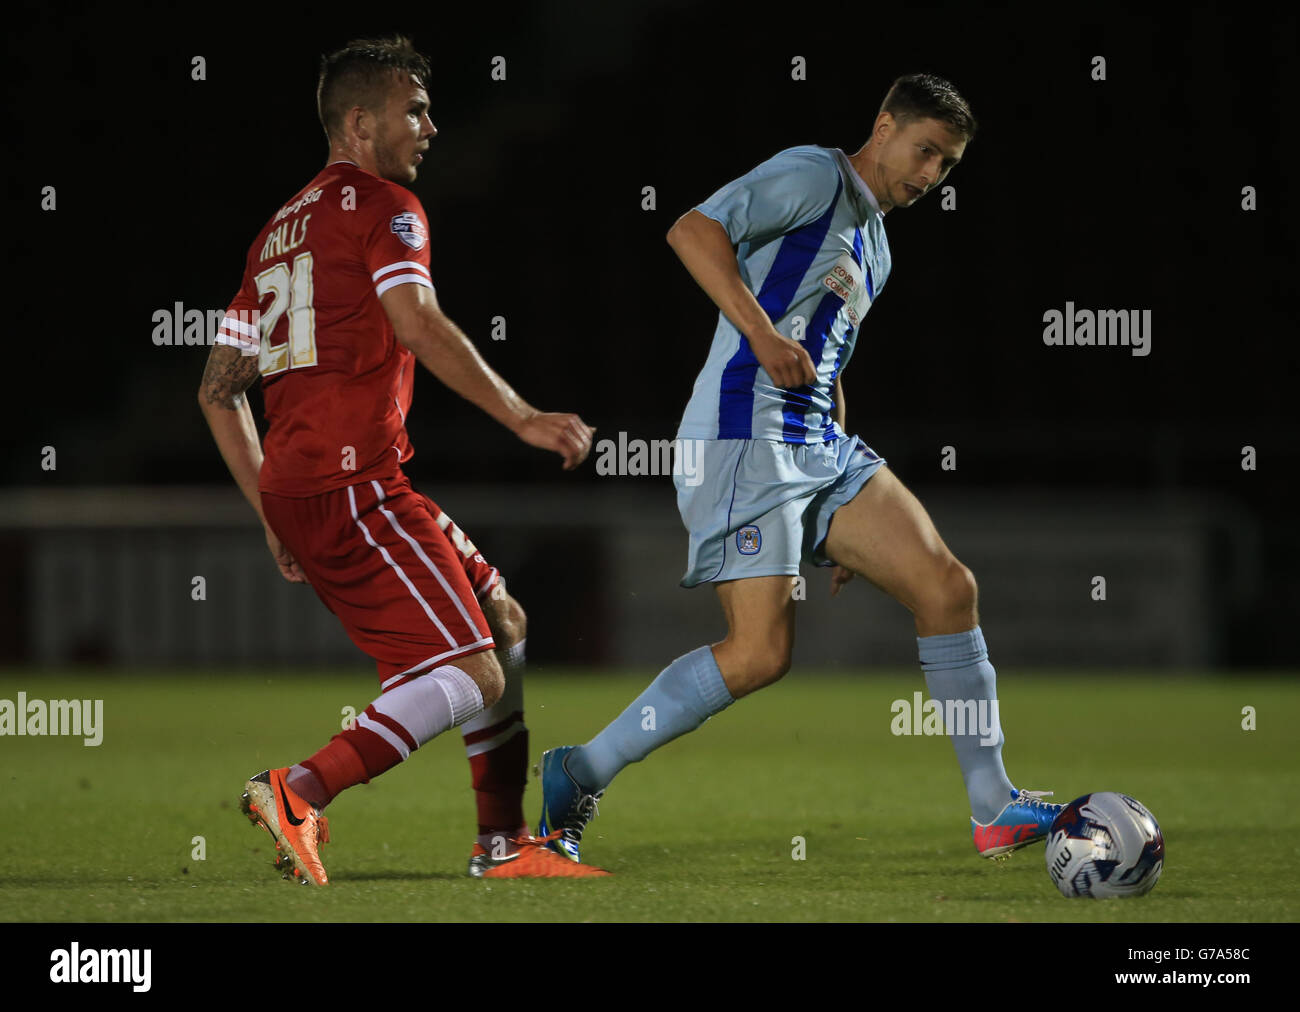 Coventry City's Shaun Miller battles with Cardiff City's Joe Ralls during the Capital One Cup First Round match at Sixfields Stadium, Northampton. Stock Photo